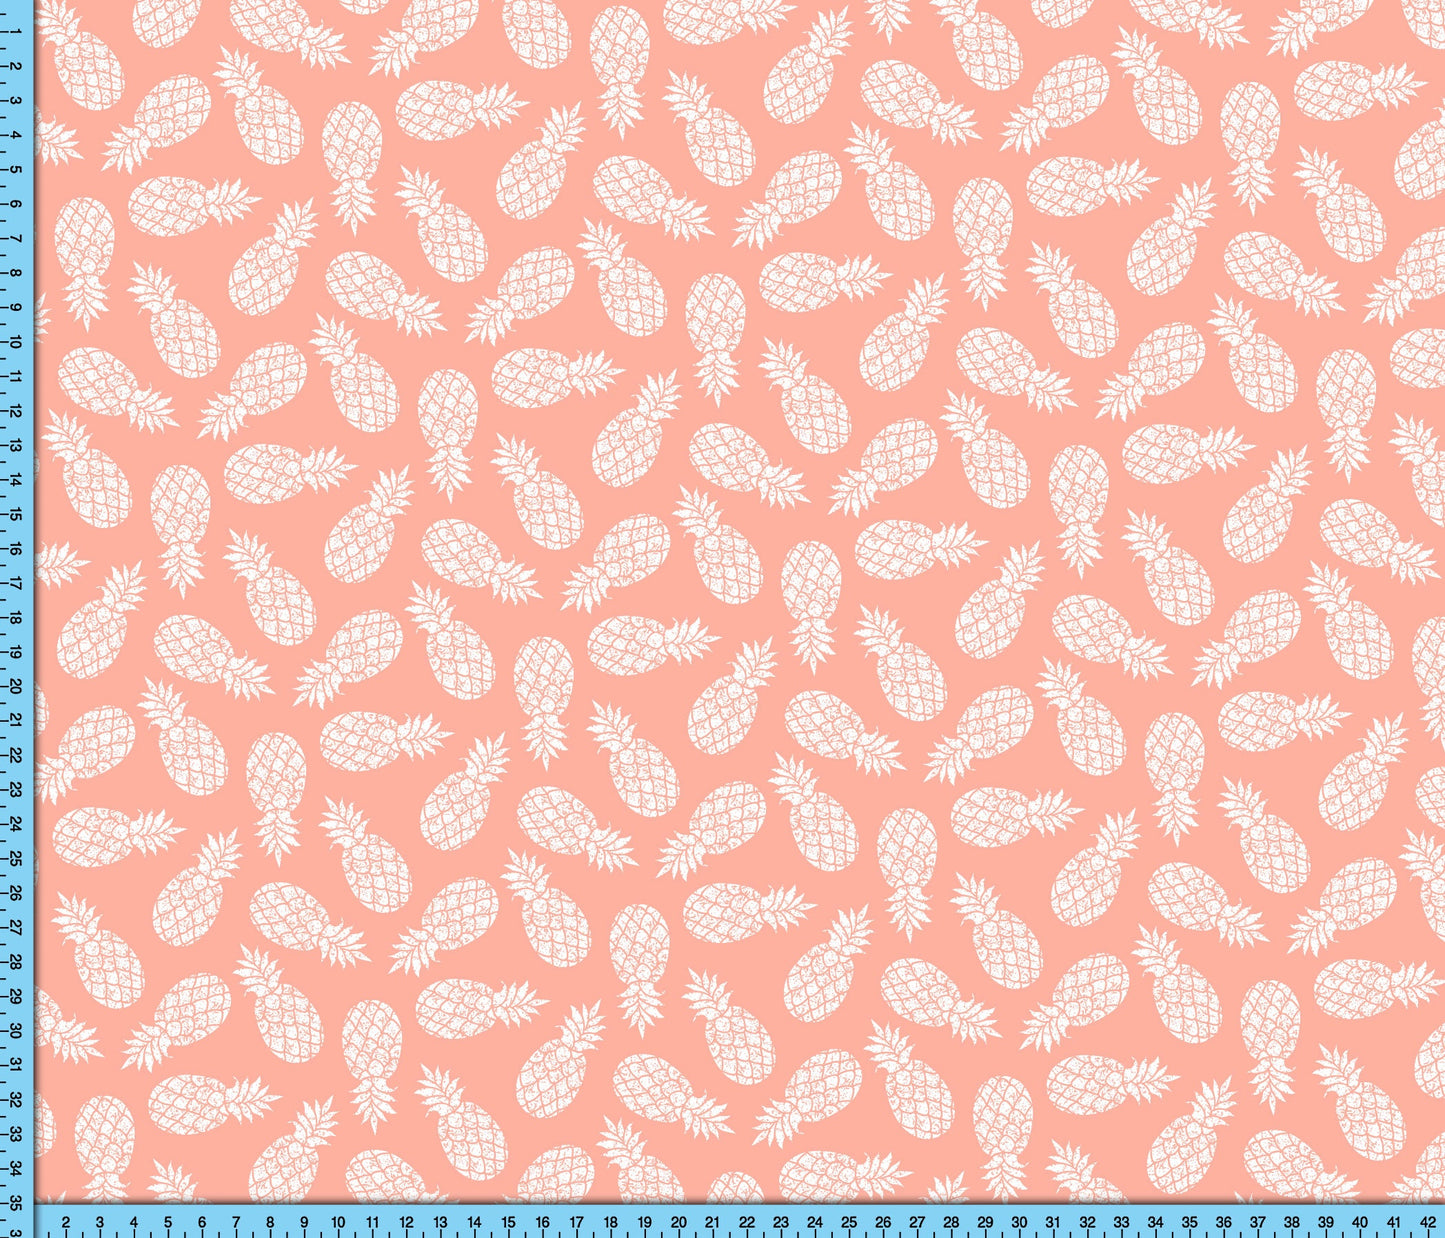 Pink Pineapple Fabric, Vintage Style Tropical Woodcut Print on choice of fabrics By the Yard